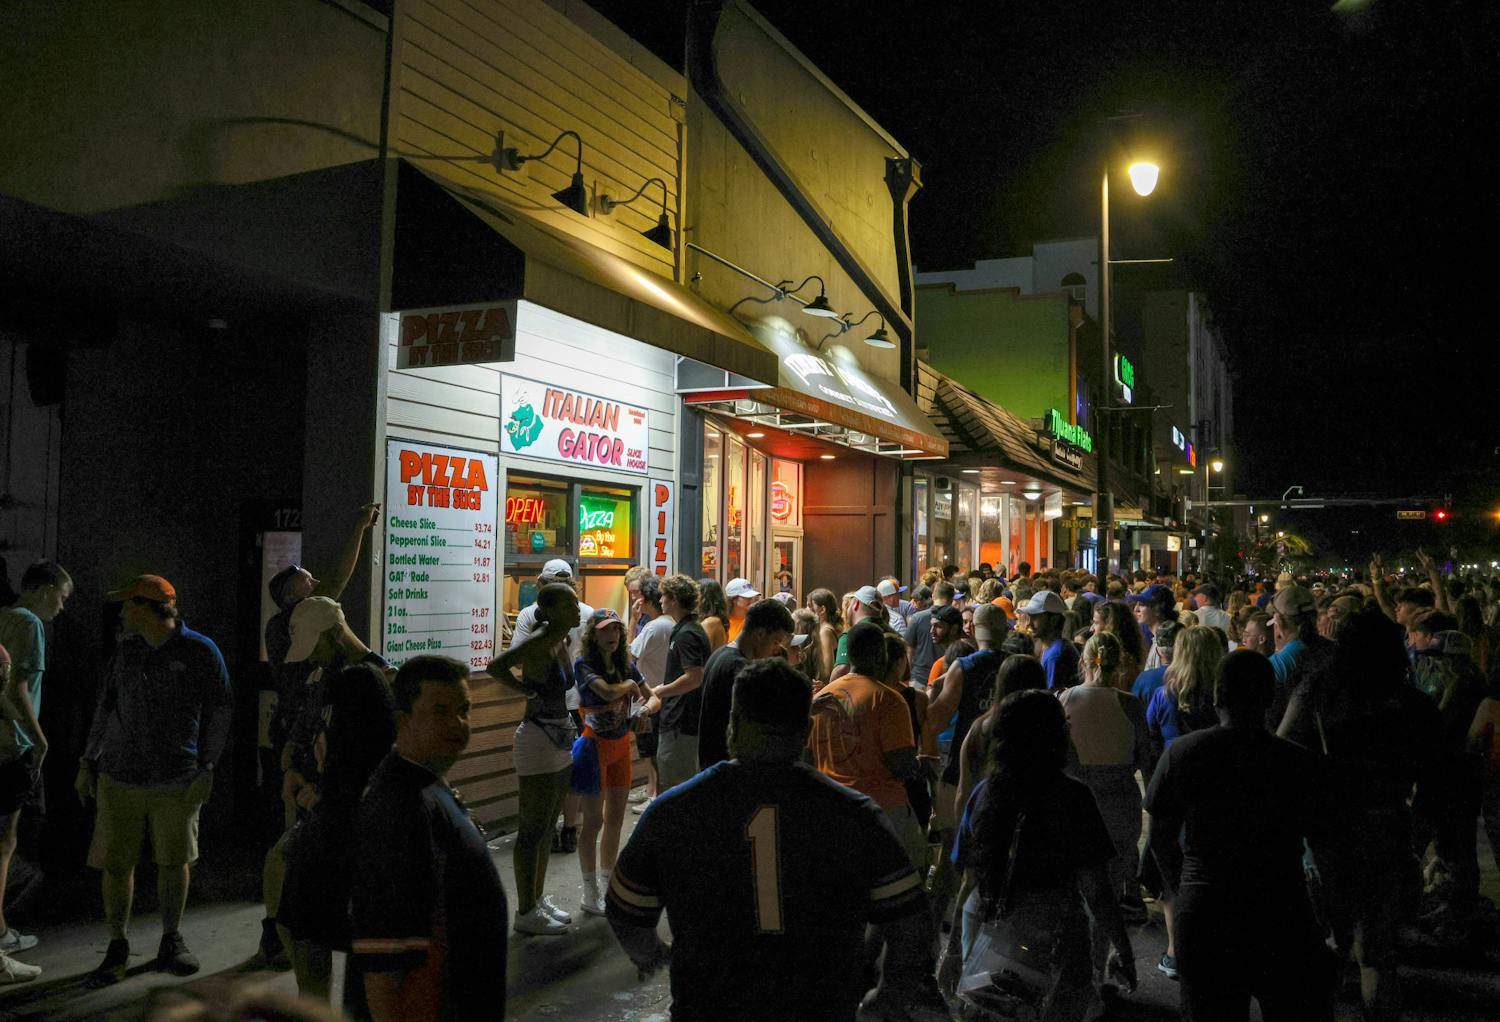 Fans of both Florida and USF wait in line for pizza at Italian Gator following the Gator’s 31-28 win over the Bulls Saturday, Sept 17, 2022.